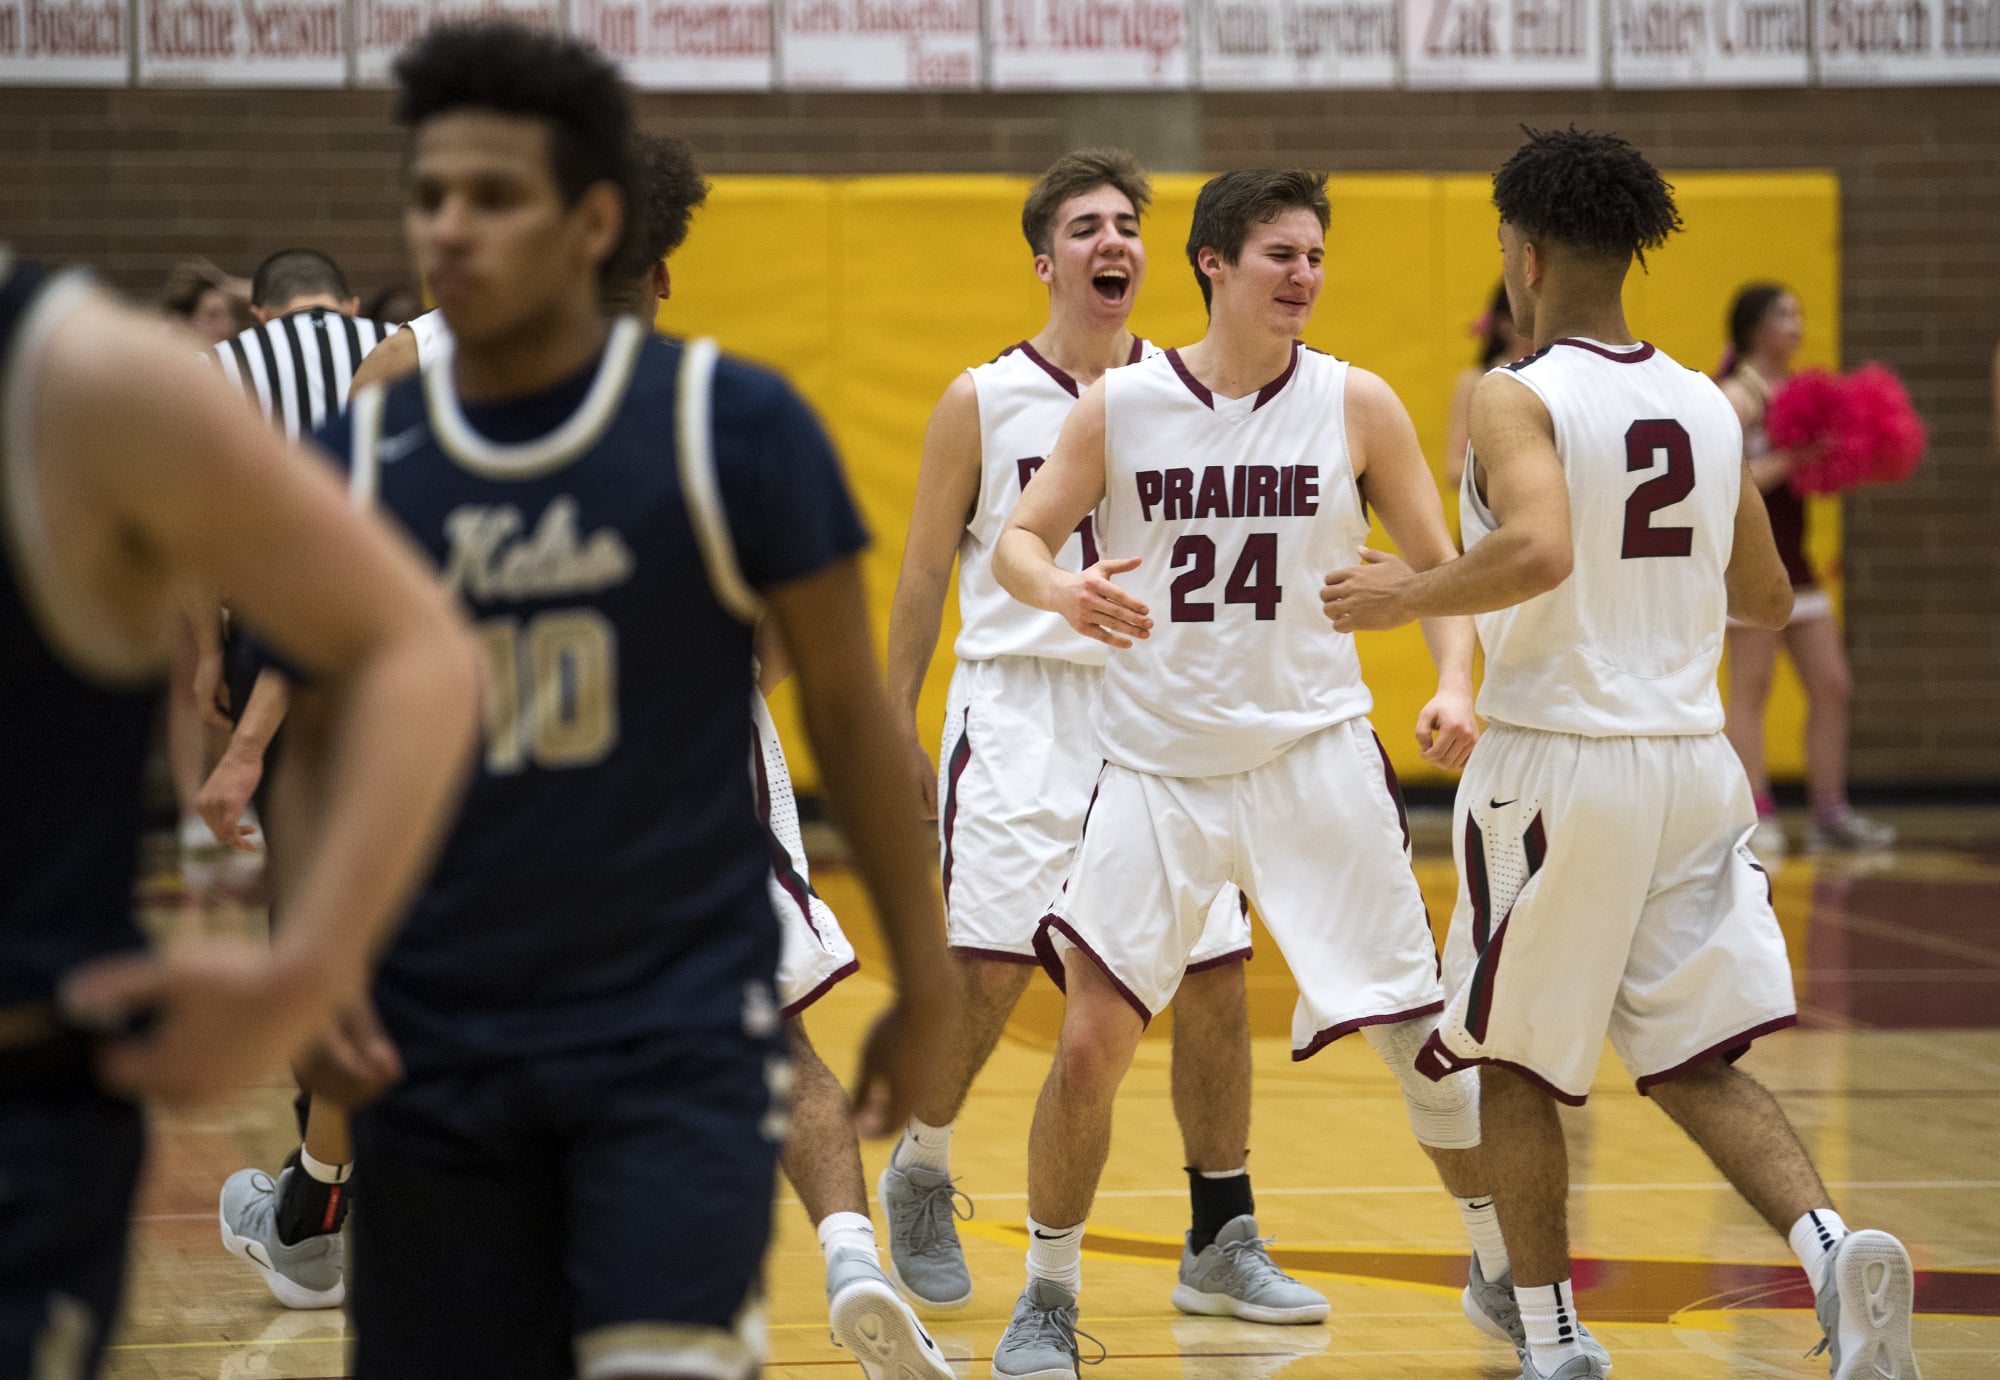 Prairie's Thomas Hapgood (10), Bronson King (24) and Aidan Fraly (2) celebrate their win after the game against Kelso in Vancouver on Jan. 22, 2019.